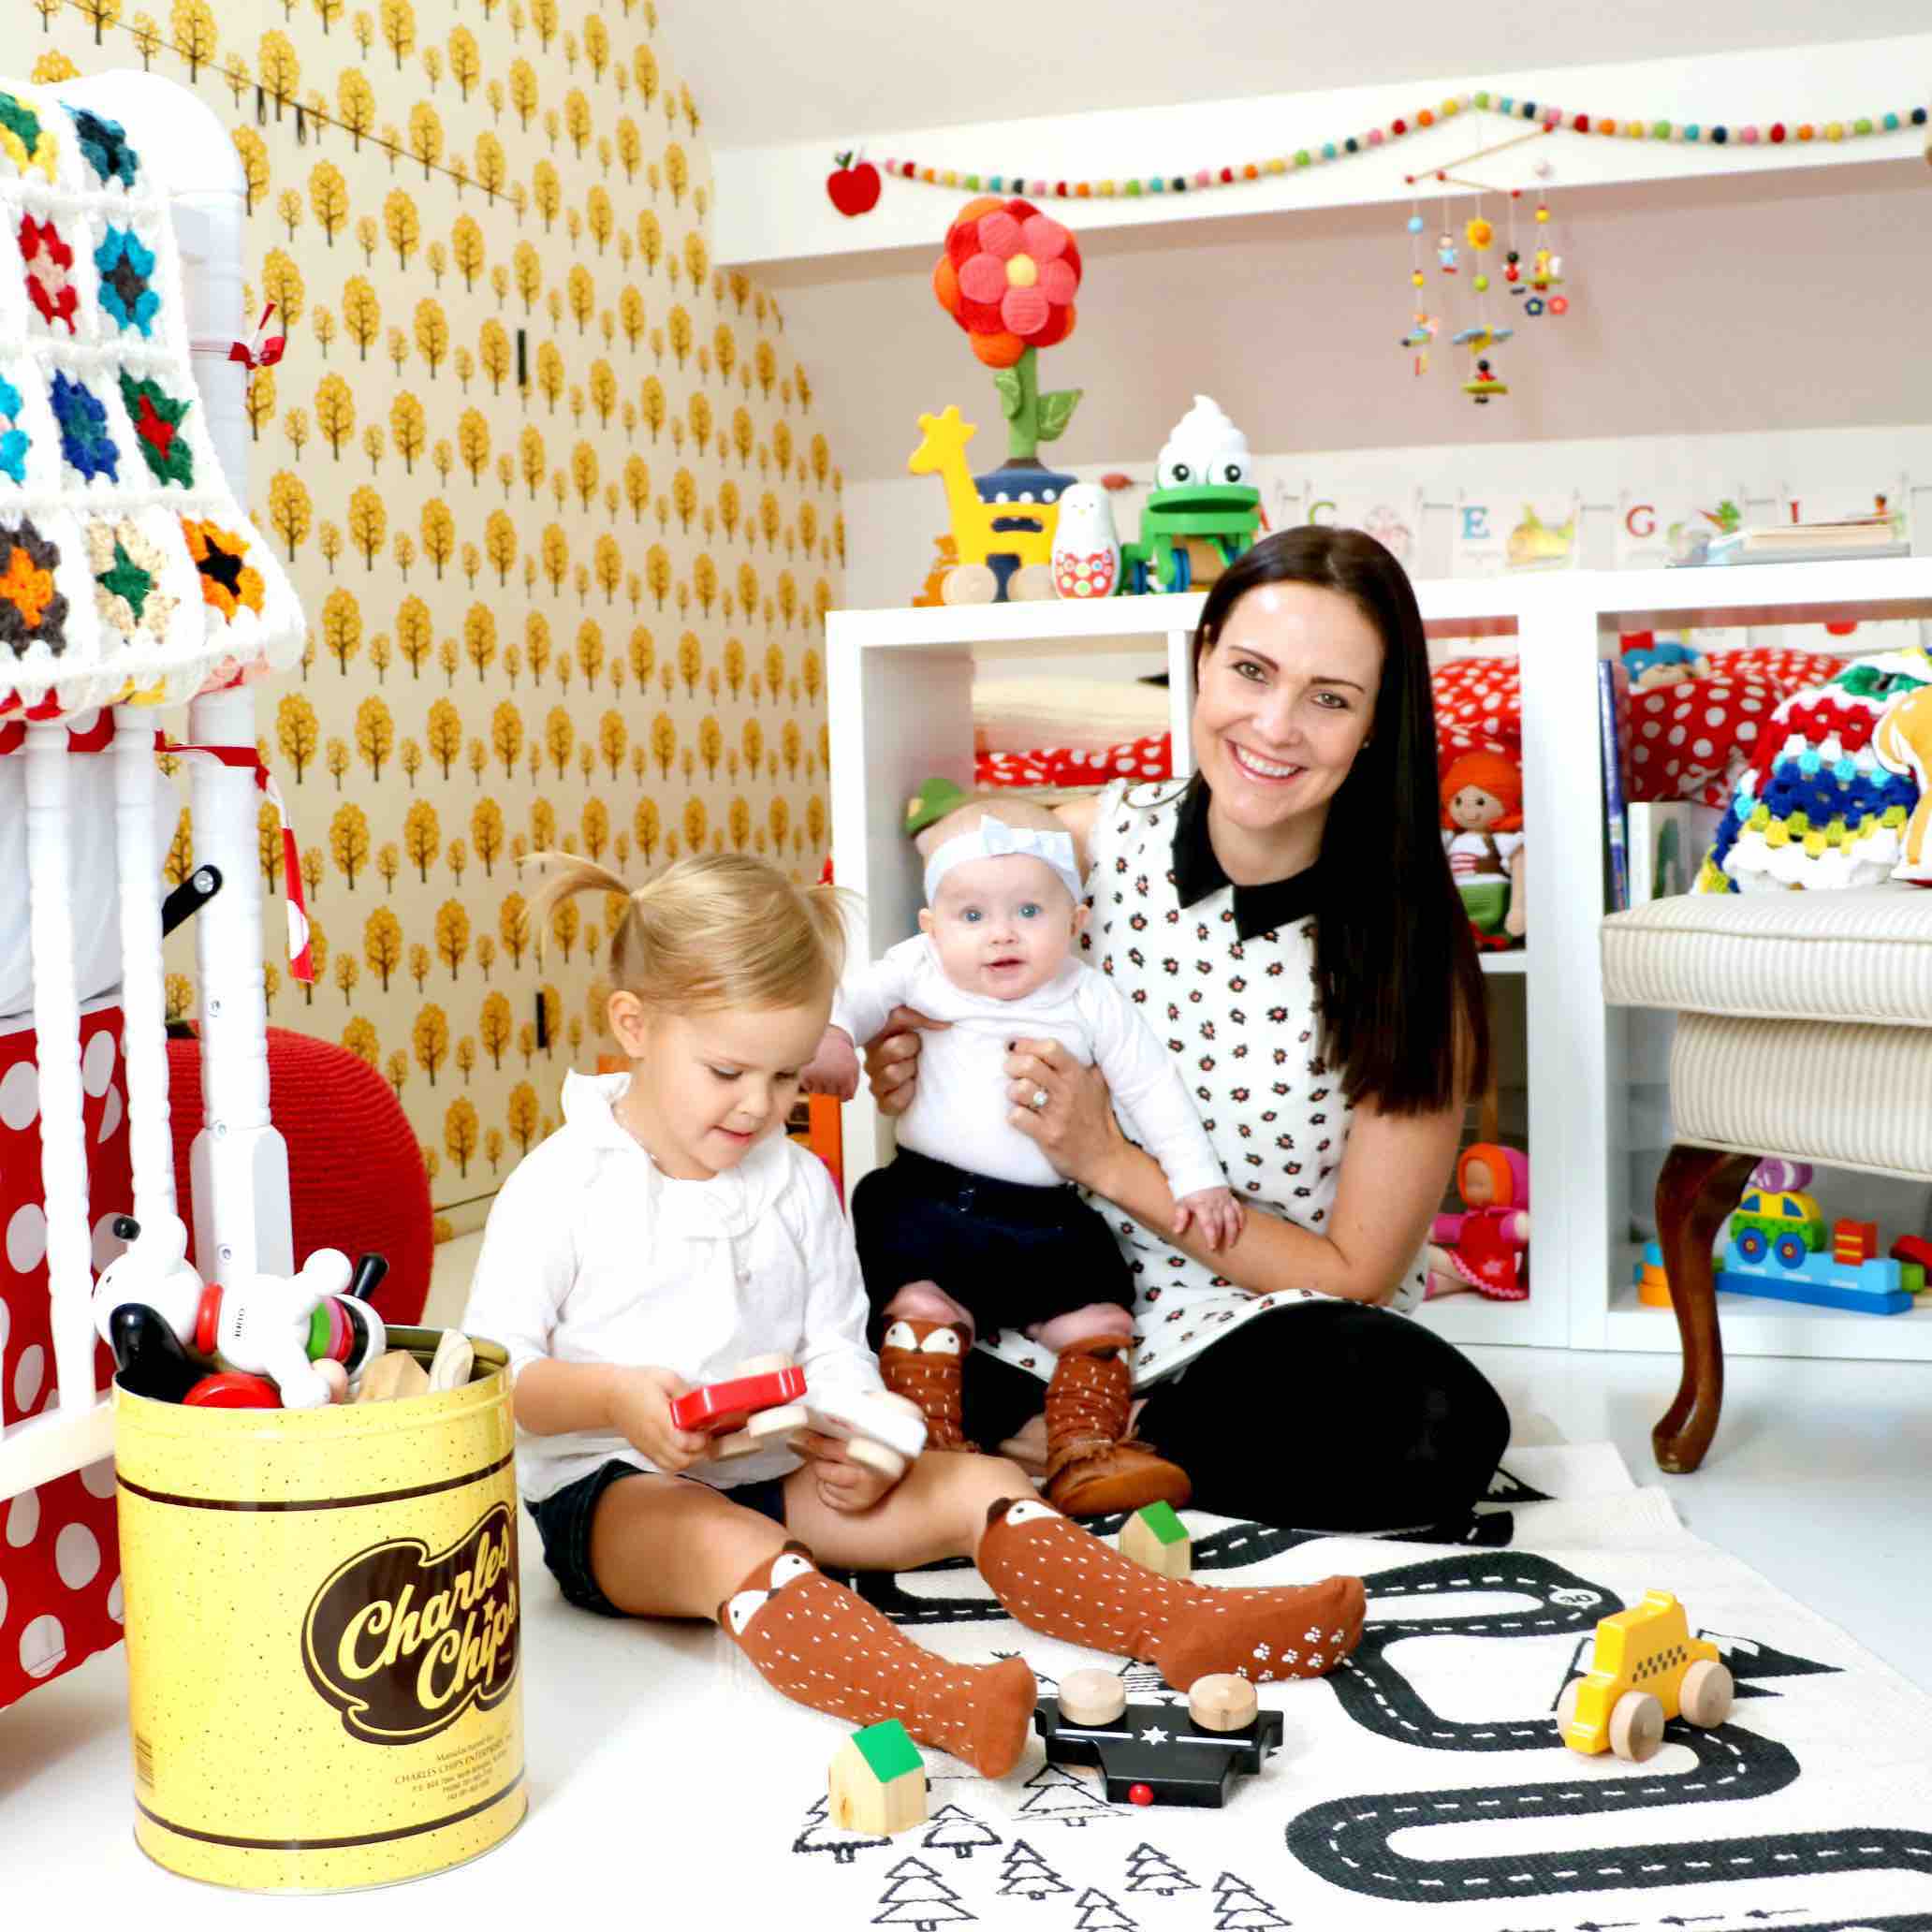 Children’s high-end interior design is about to become the latest “must-have” in Las Vegas, thanks to Jannicke Ramsø and her new company, Tiny Little Pads.